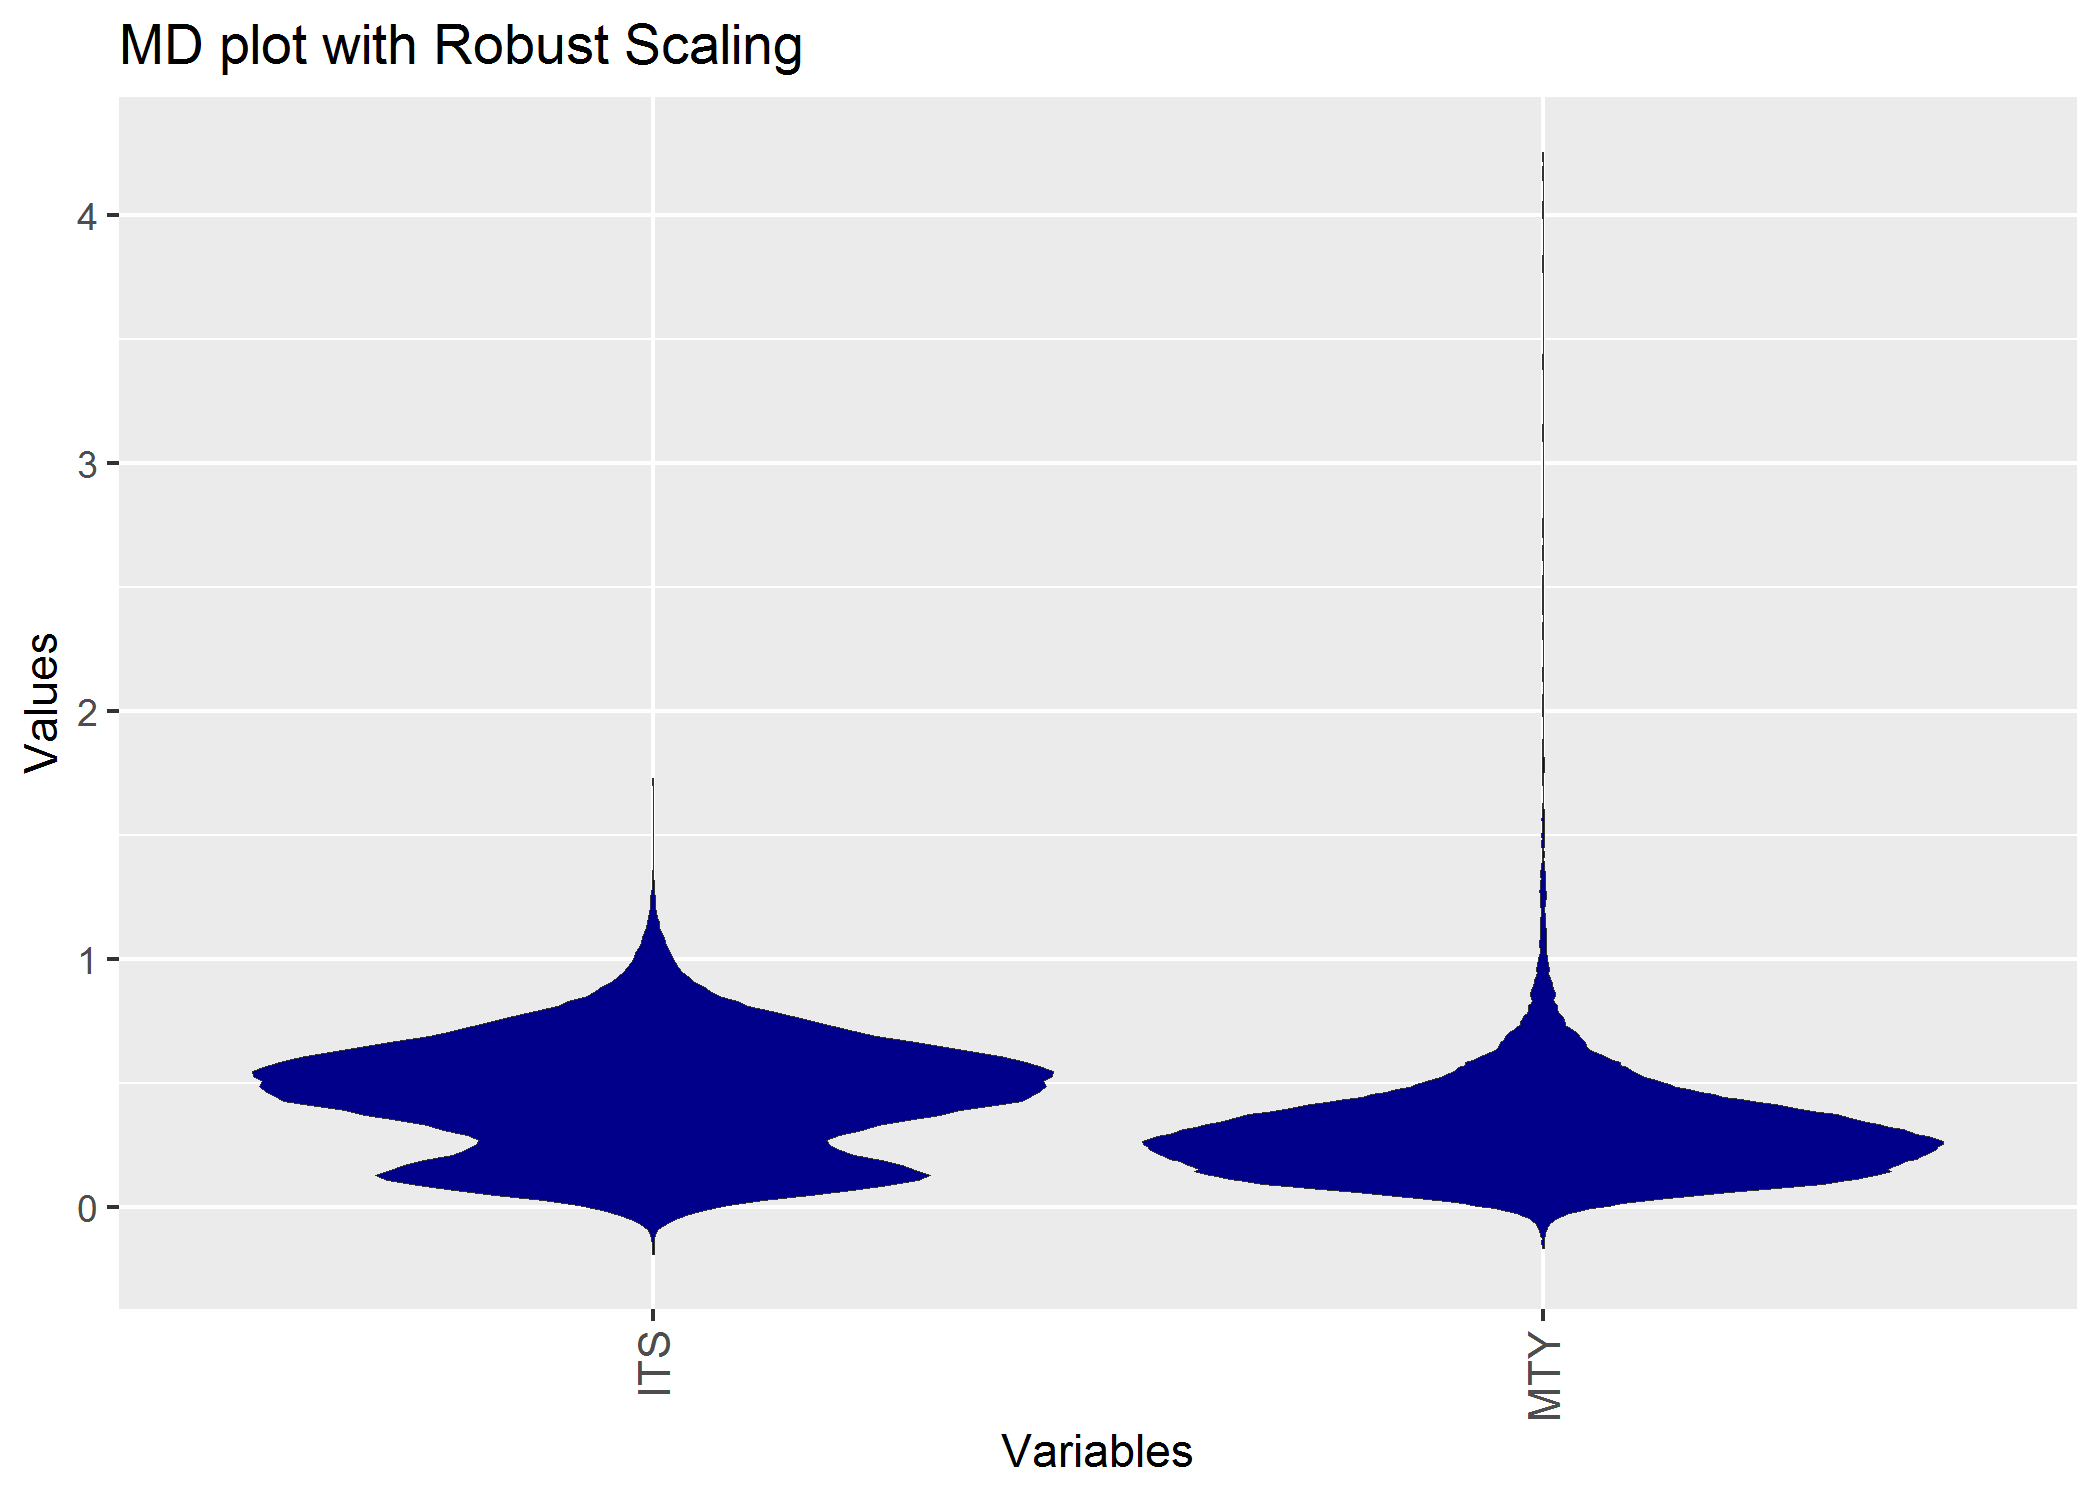 ../_images/RobustMDplot.png